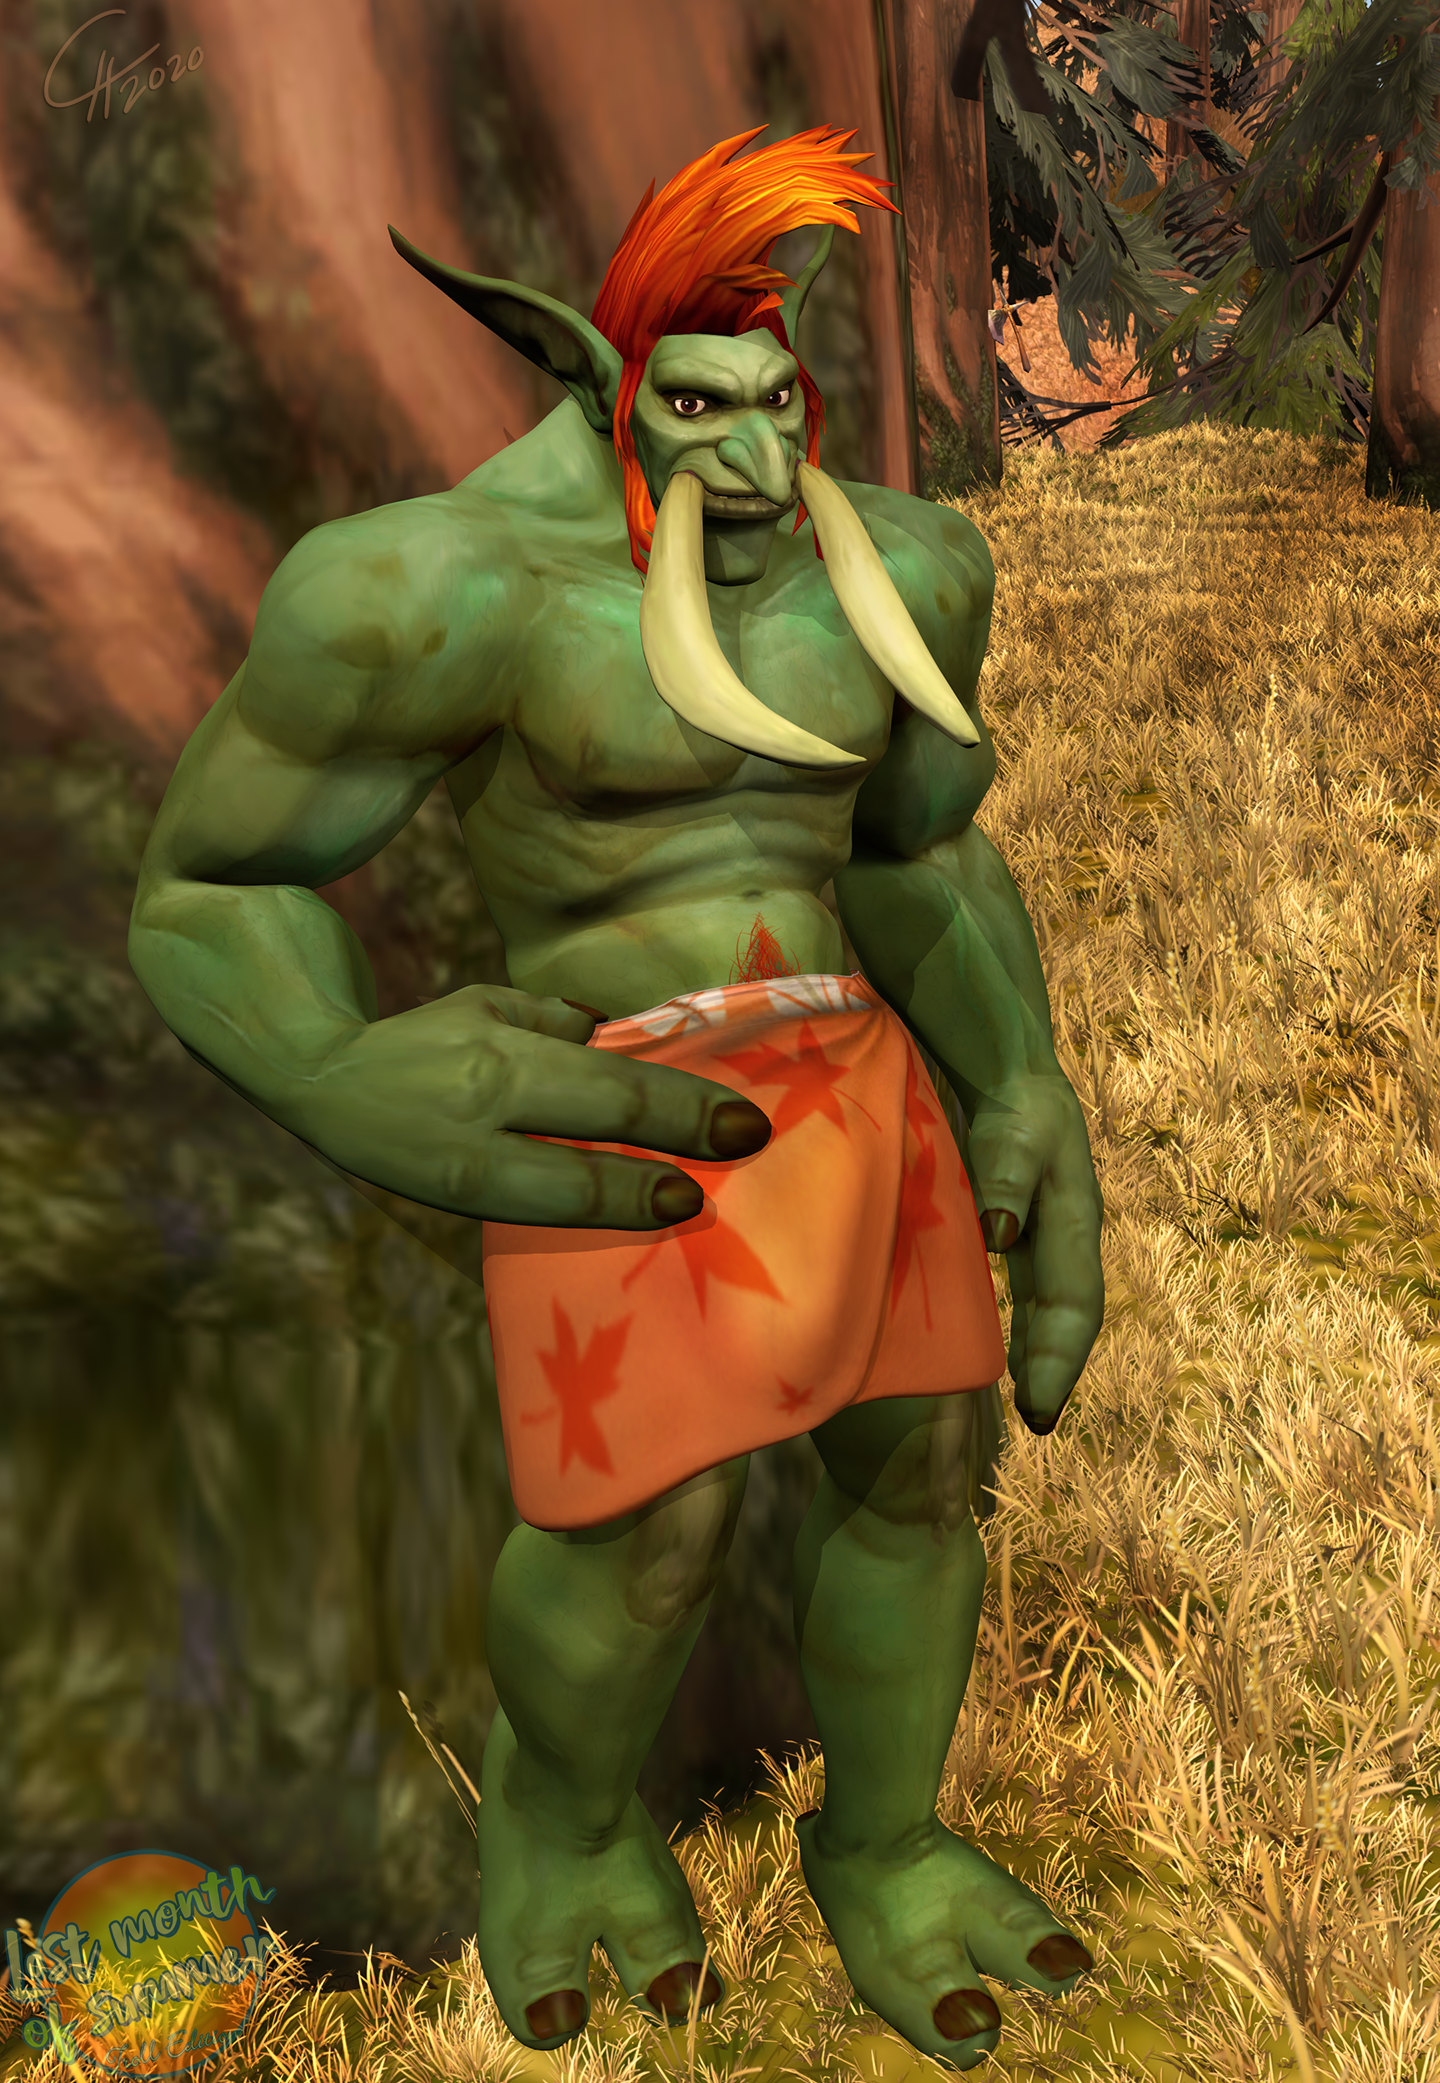 Last Month of Summer 2020 #2 [Troll/SFW] 
Forest trolls are noted to be taller and more muscular
on average than jungle and sand trolls, yet noticeably
smaller than the Zandalari and ice trolls.
[b][url=http://bakaras.com/murlocish/albums/userpics/10001/18/SummerJamTroll2XL.png]==XL-Size Edit==[/url][/b]
Keywords: Troll;SFW